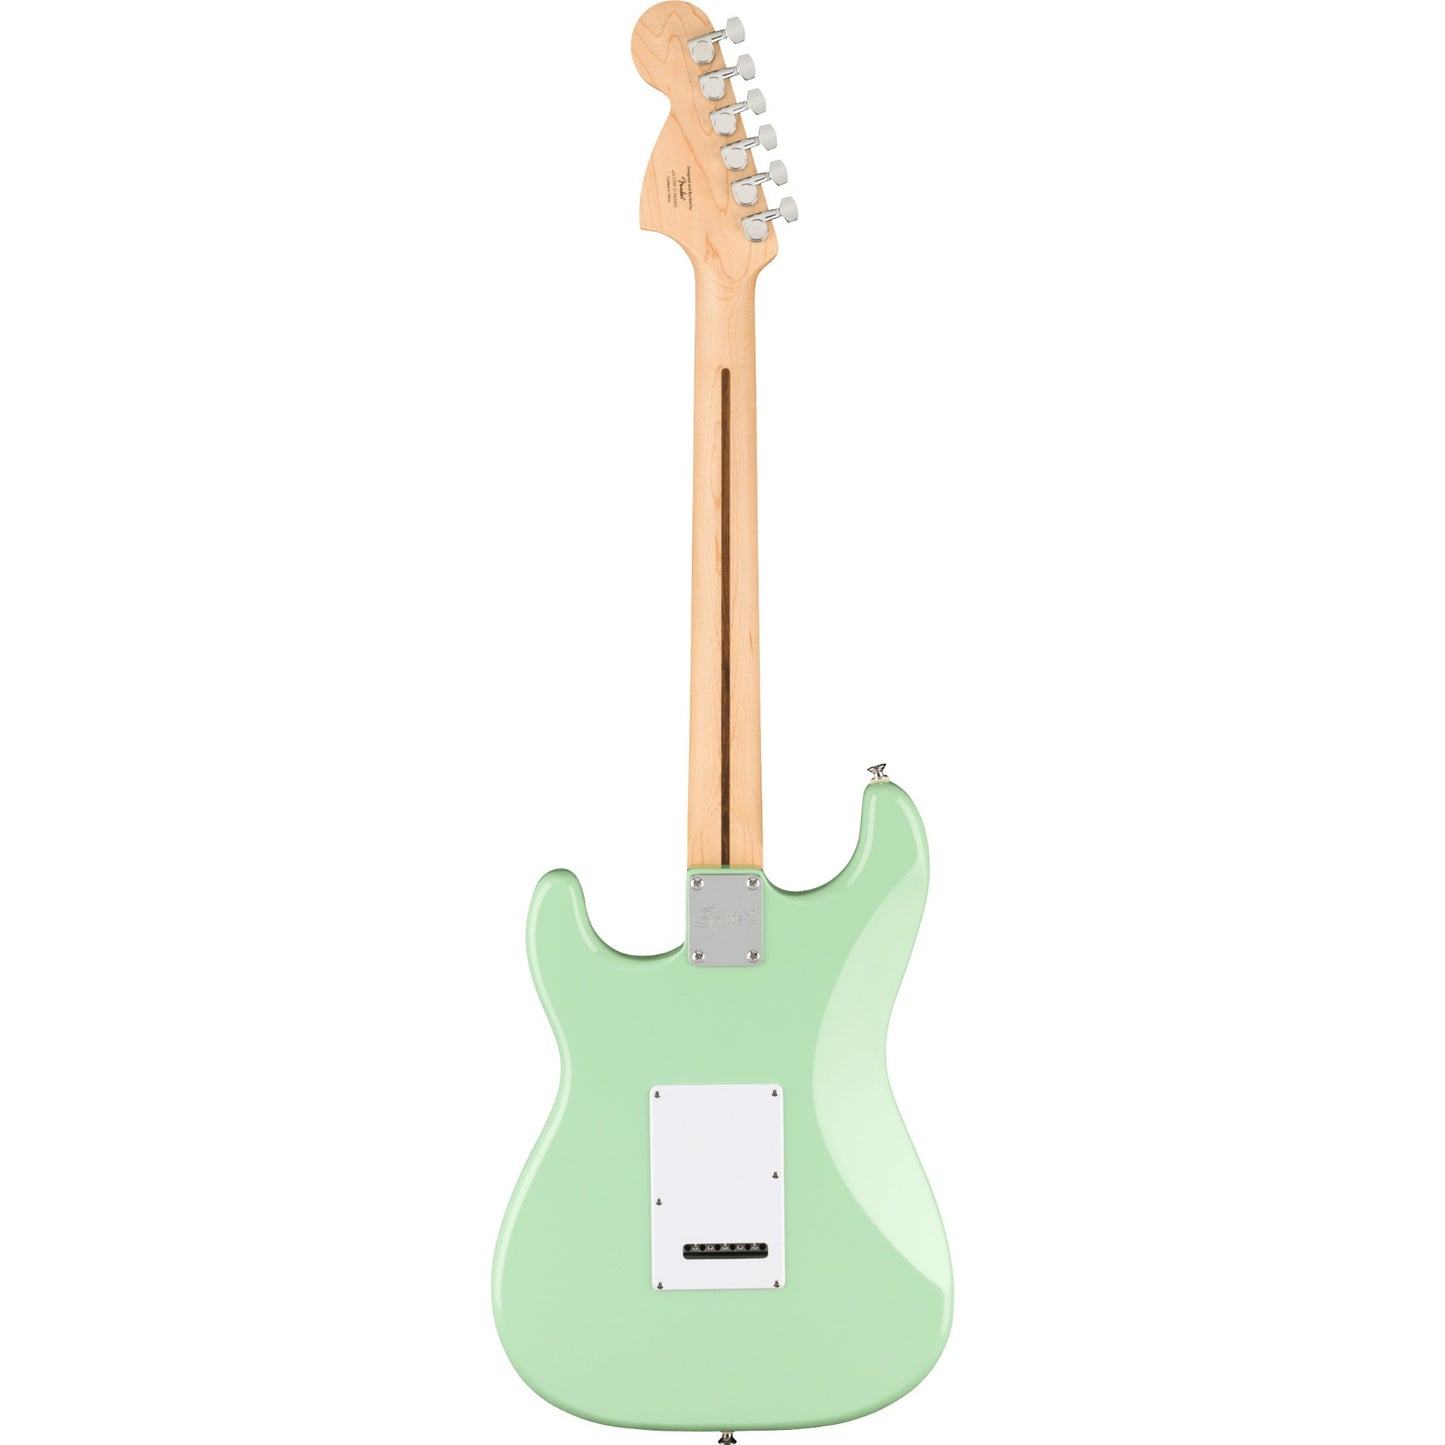 Squier Affinity Series Stratocaster Electric Guitar in Surf Green